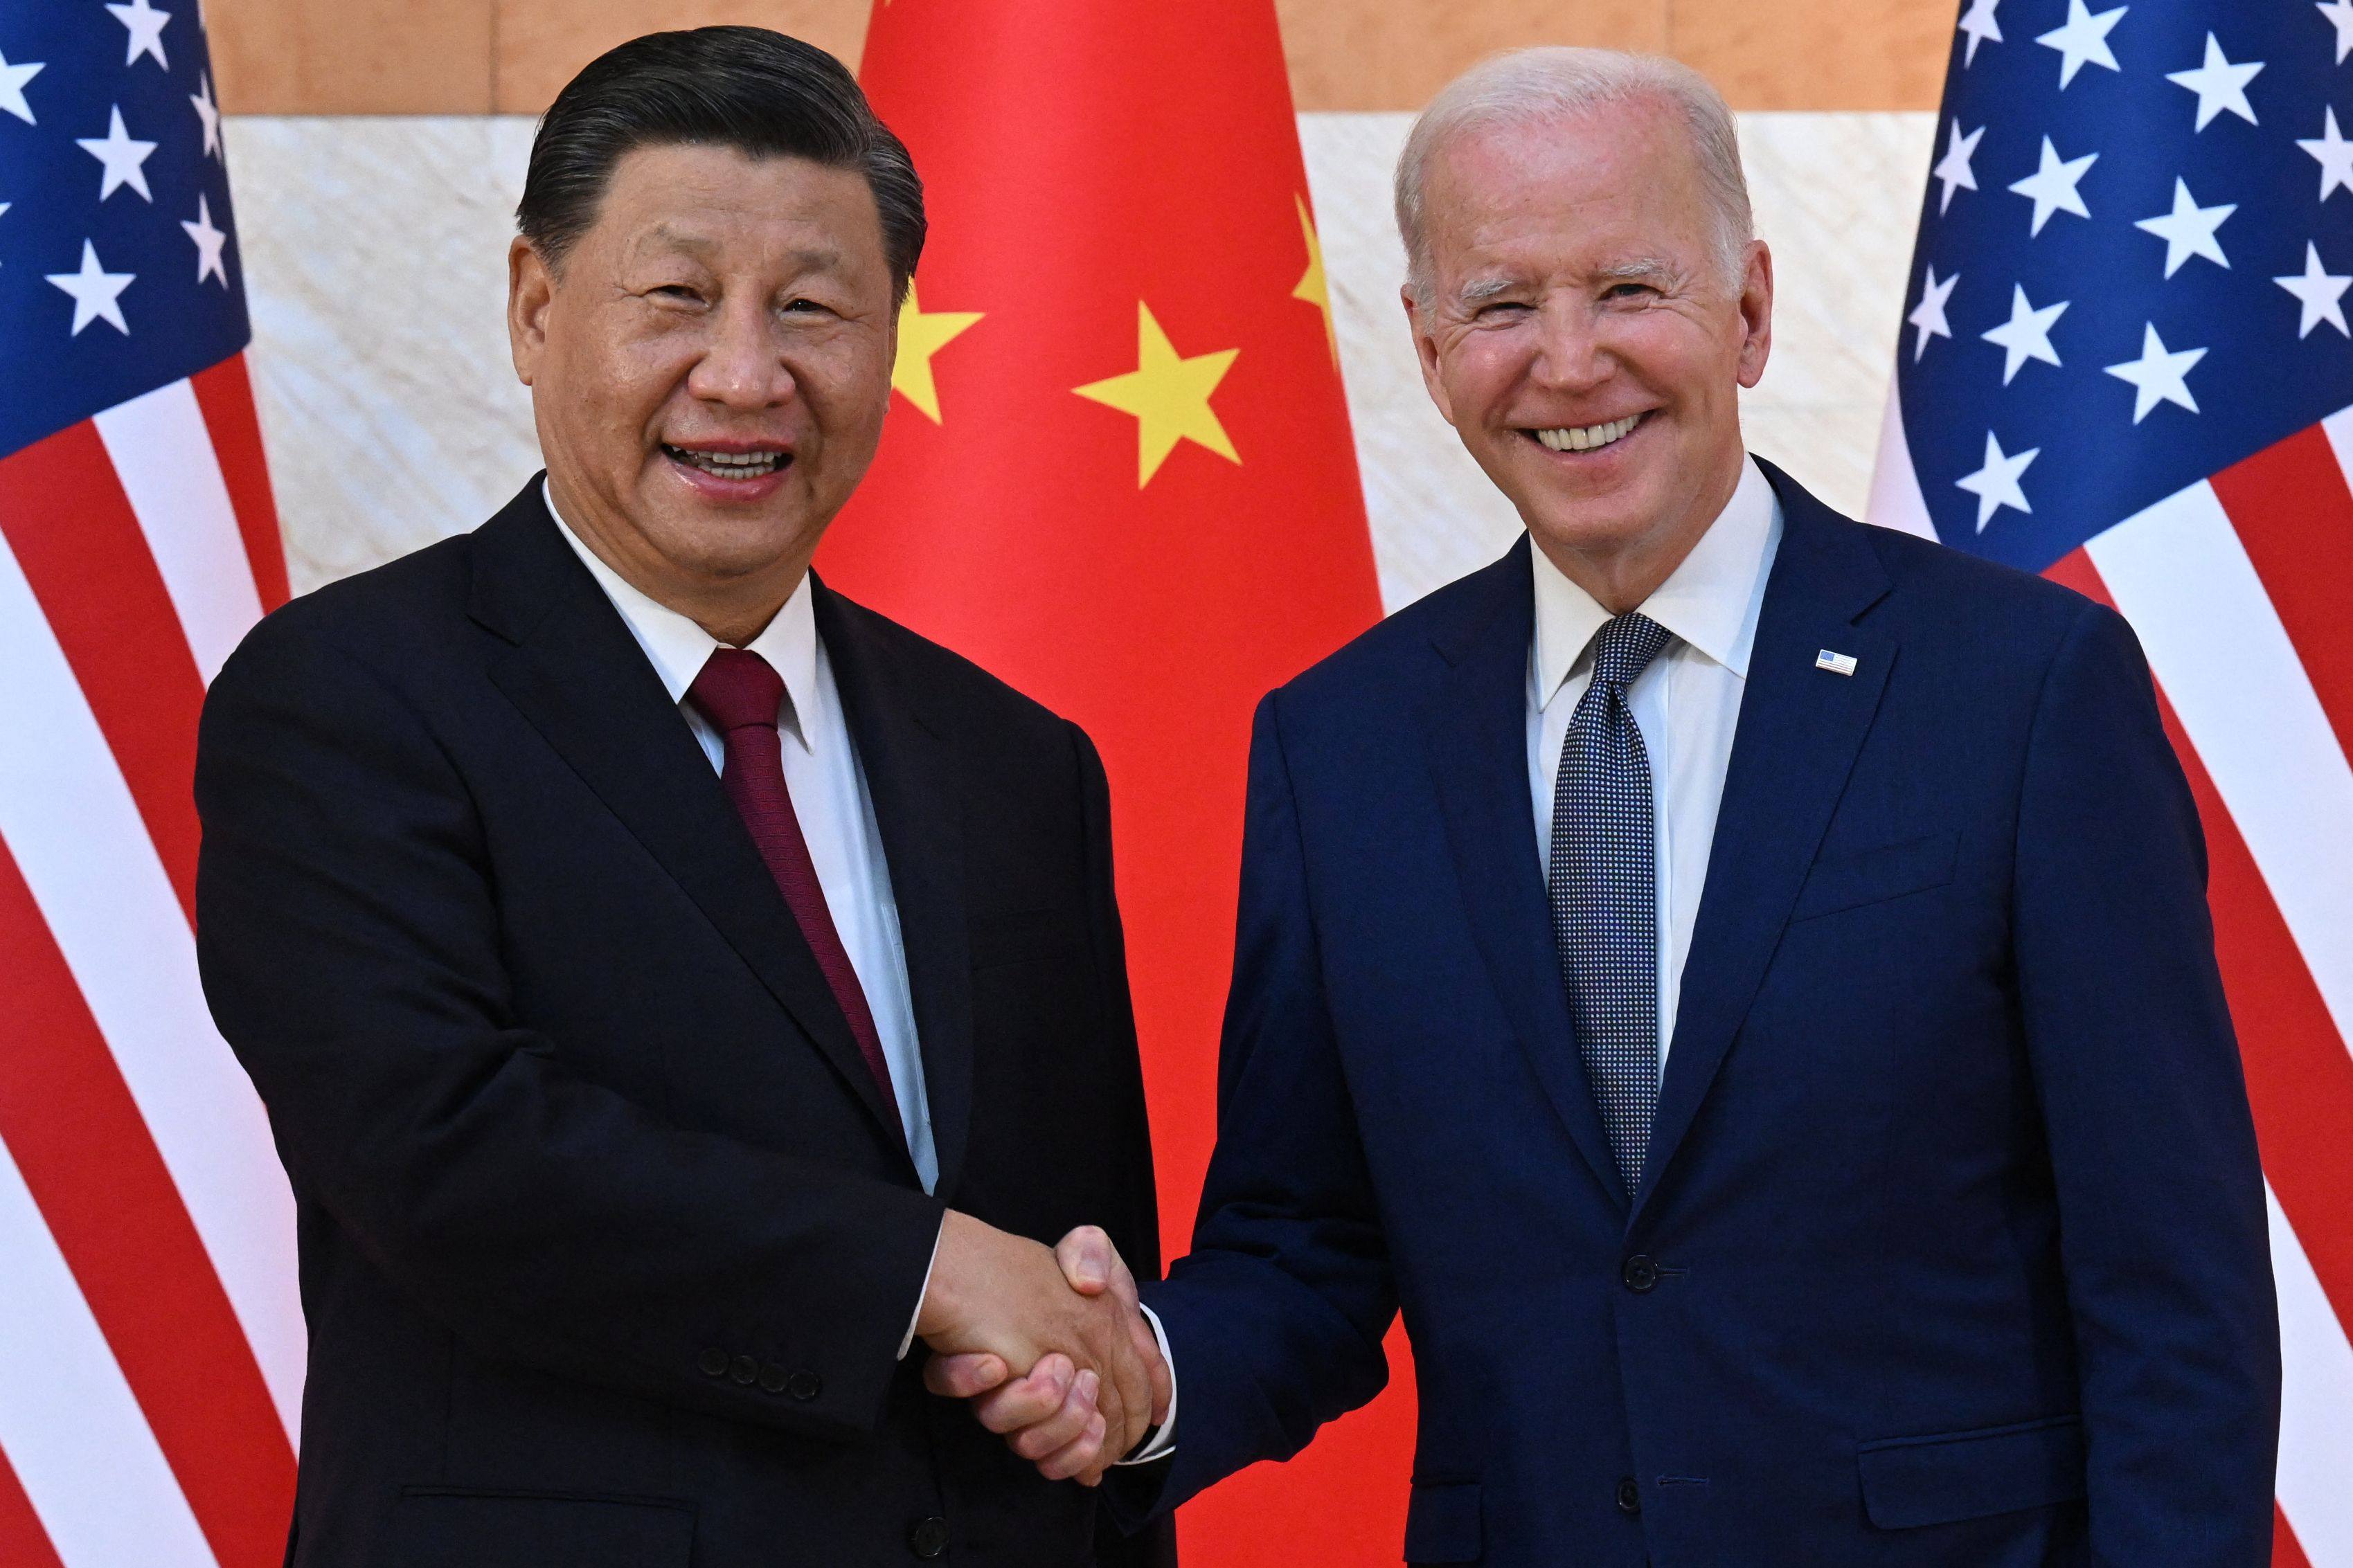 Chinese President Xi Jinping and US President Joe Biden shake hands on the sidelines of the Group of 20 Summit, in Nusa Dua on the Indonesian resort island of Bali, on November 14, 2022. Photo: AFP